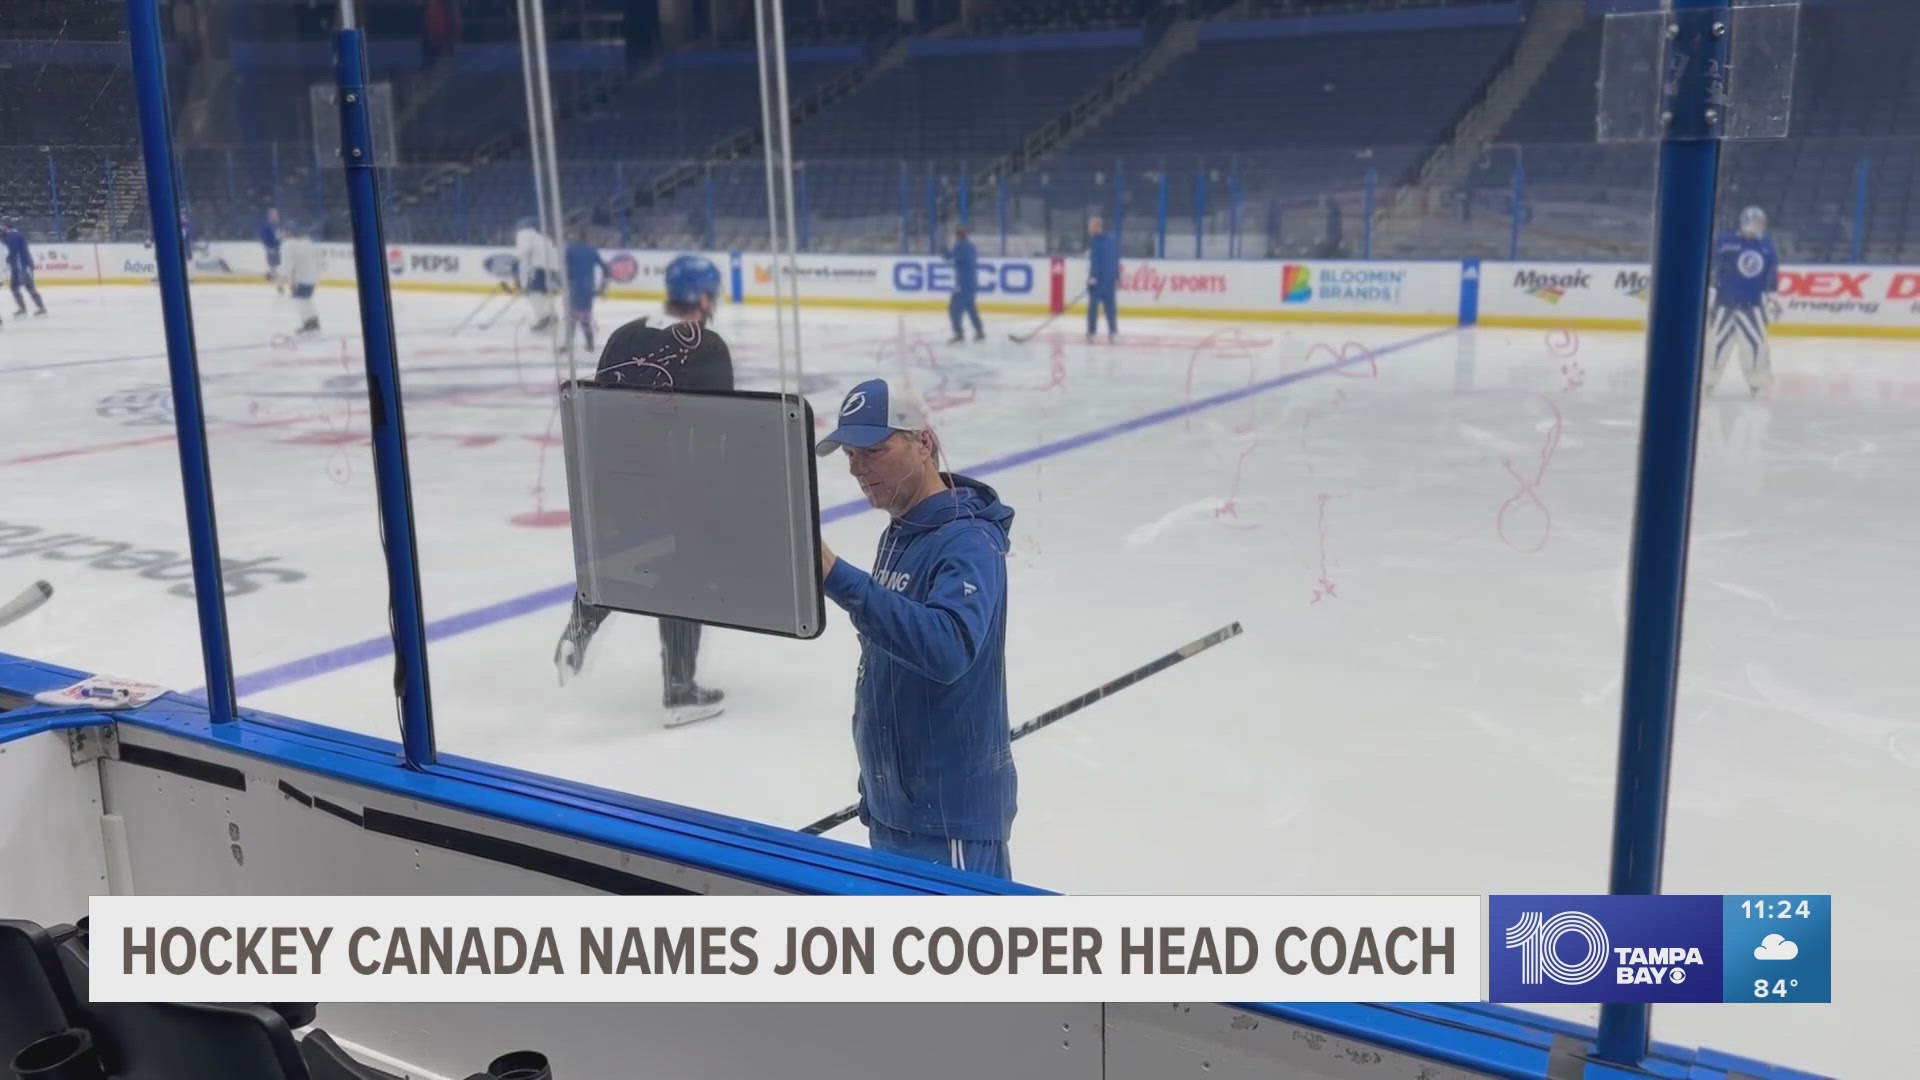 Cooper recently completed his 12th season with Tampa Bay and is the longest-tenured coach in the NHL.